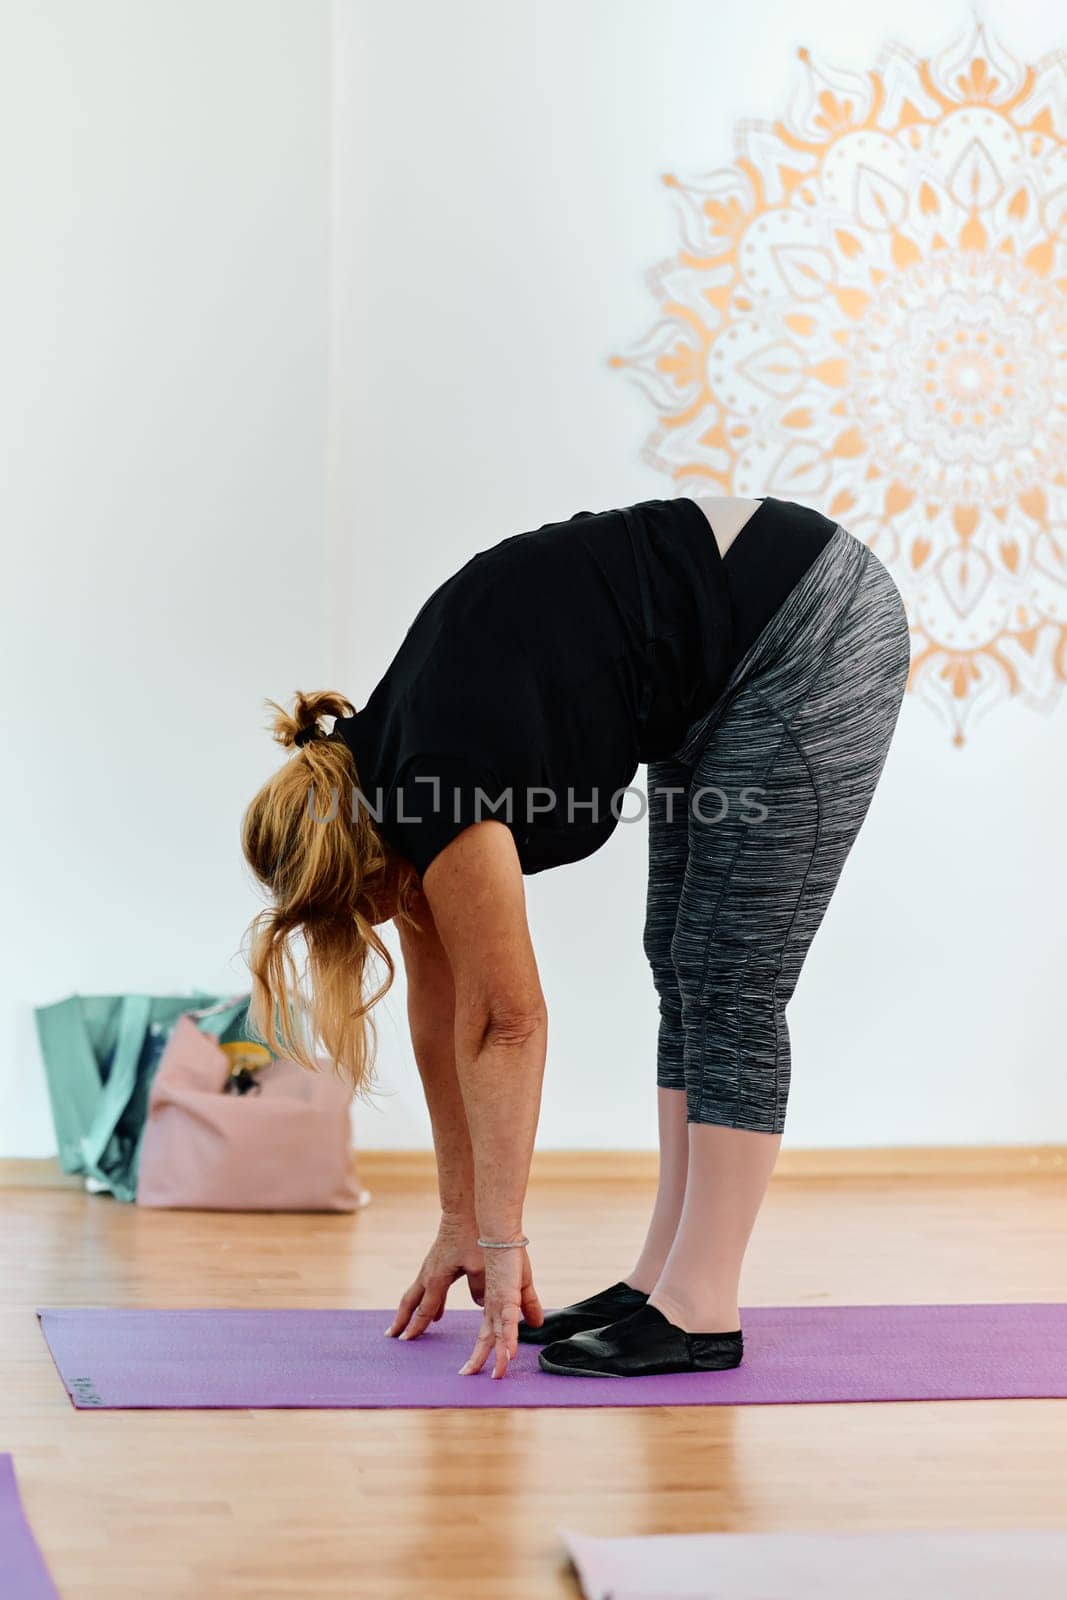 In a sunlit space, a senior woman gracefully practices rejuvenating yoga, focusing on neck, back, and leg stretches, embodying serenity and well-being.